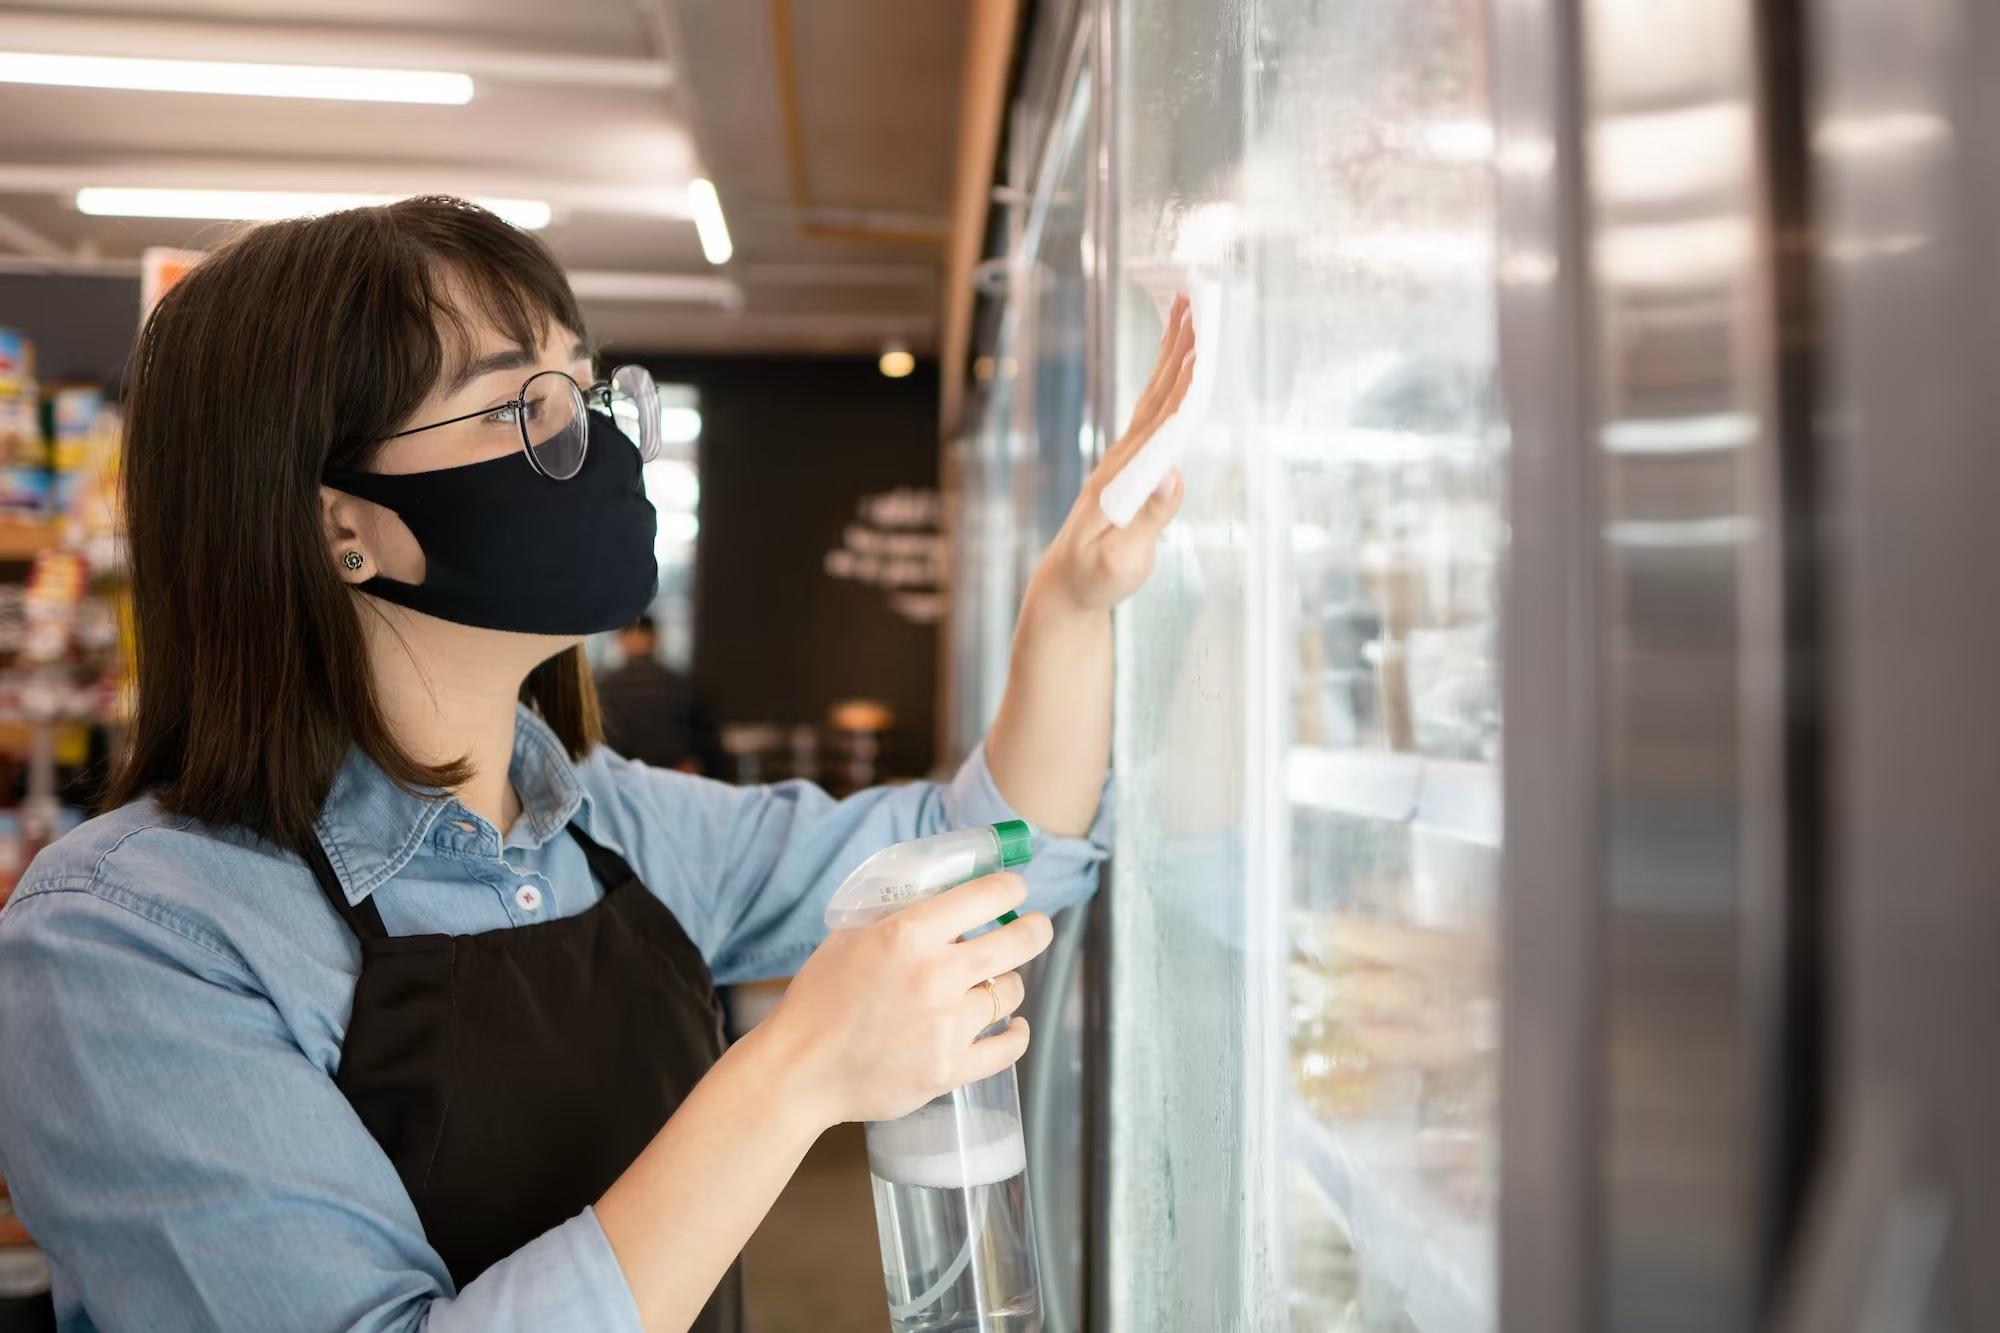 grocery store retail employee cleaning cooler doors with glass cleaner to keep things clean and shiny